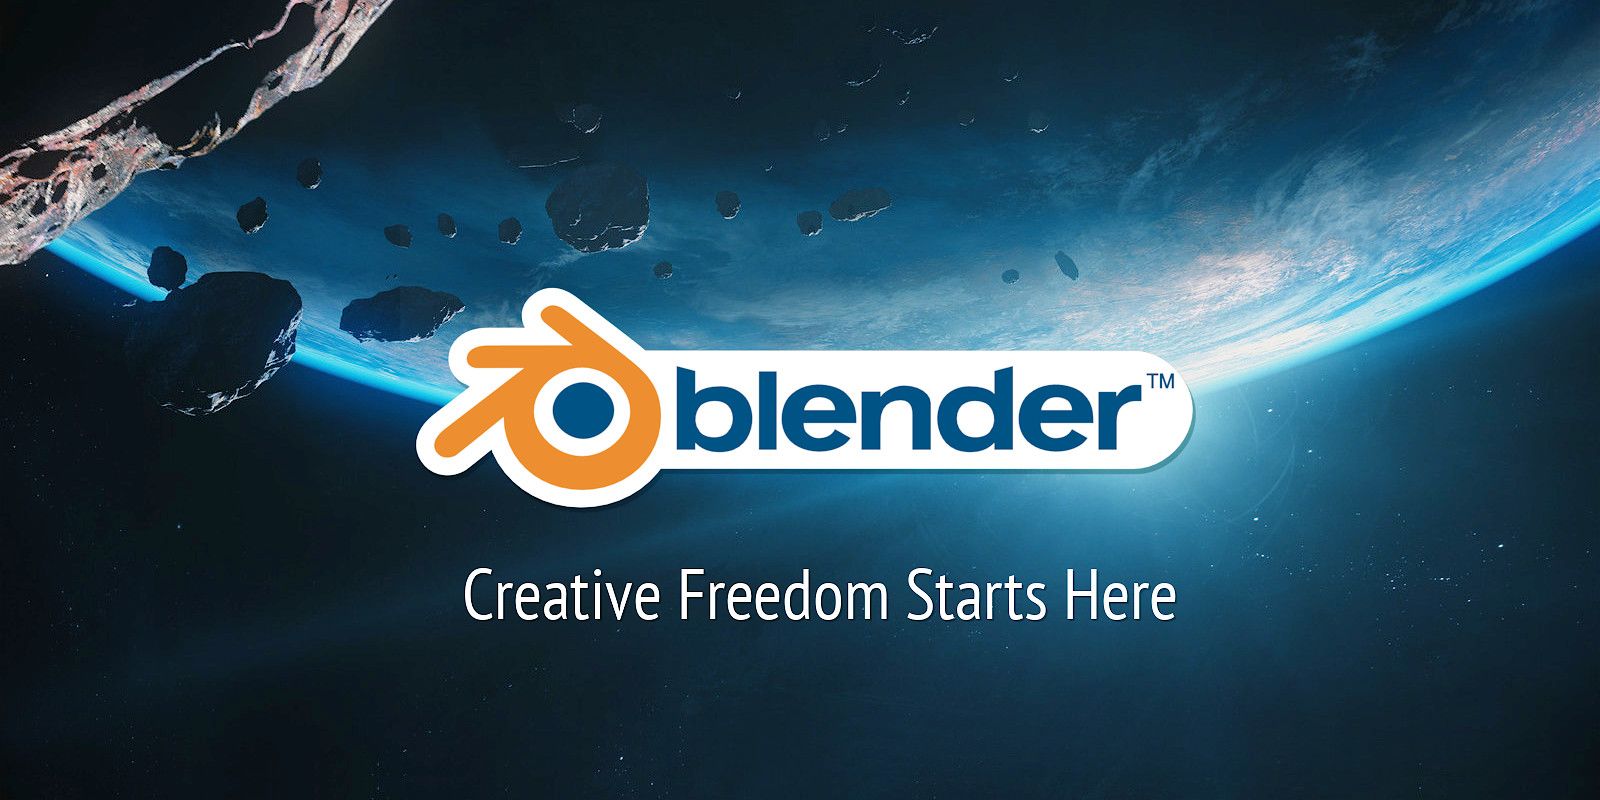 on Twitter: "Blender 2.81a is out! Some crucial issues that made into the original release have now been fixed. Kudos to the development team for creating the most reliable Blender version